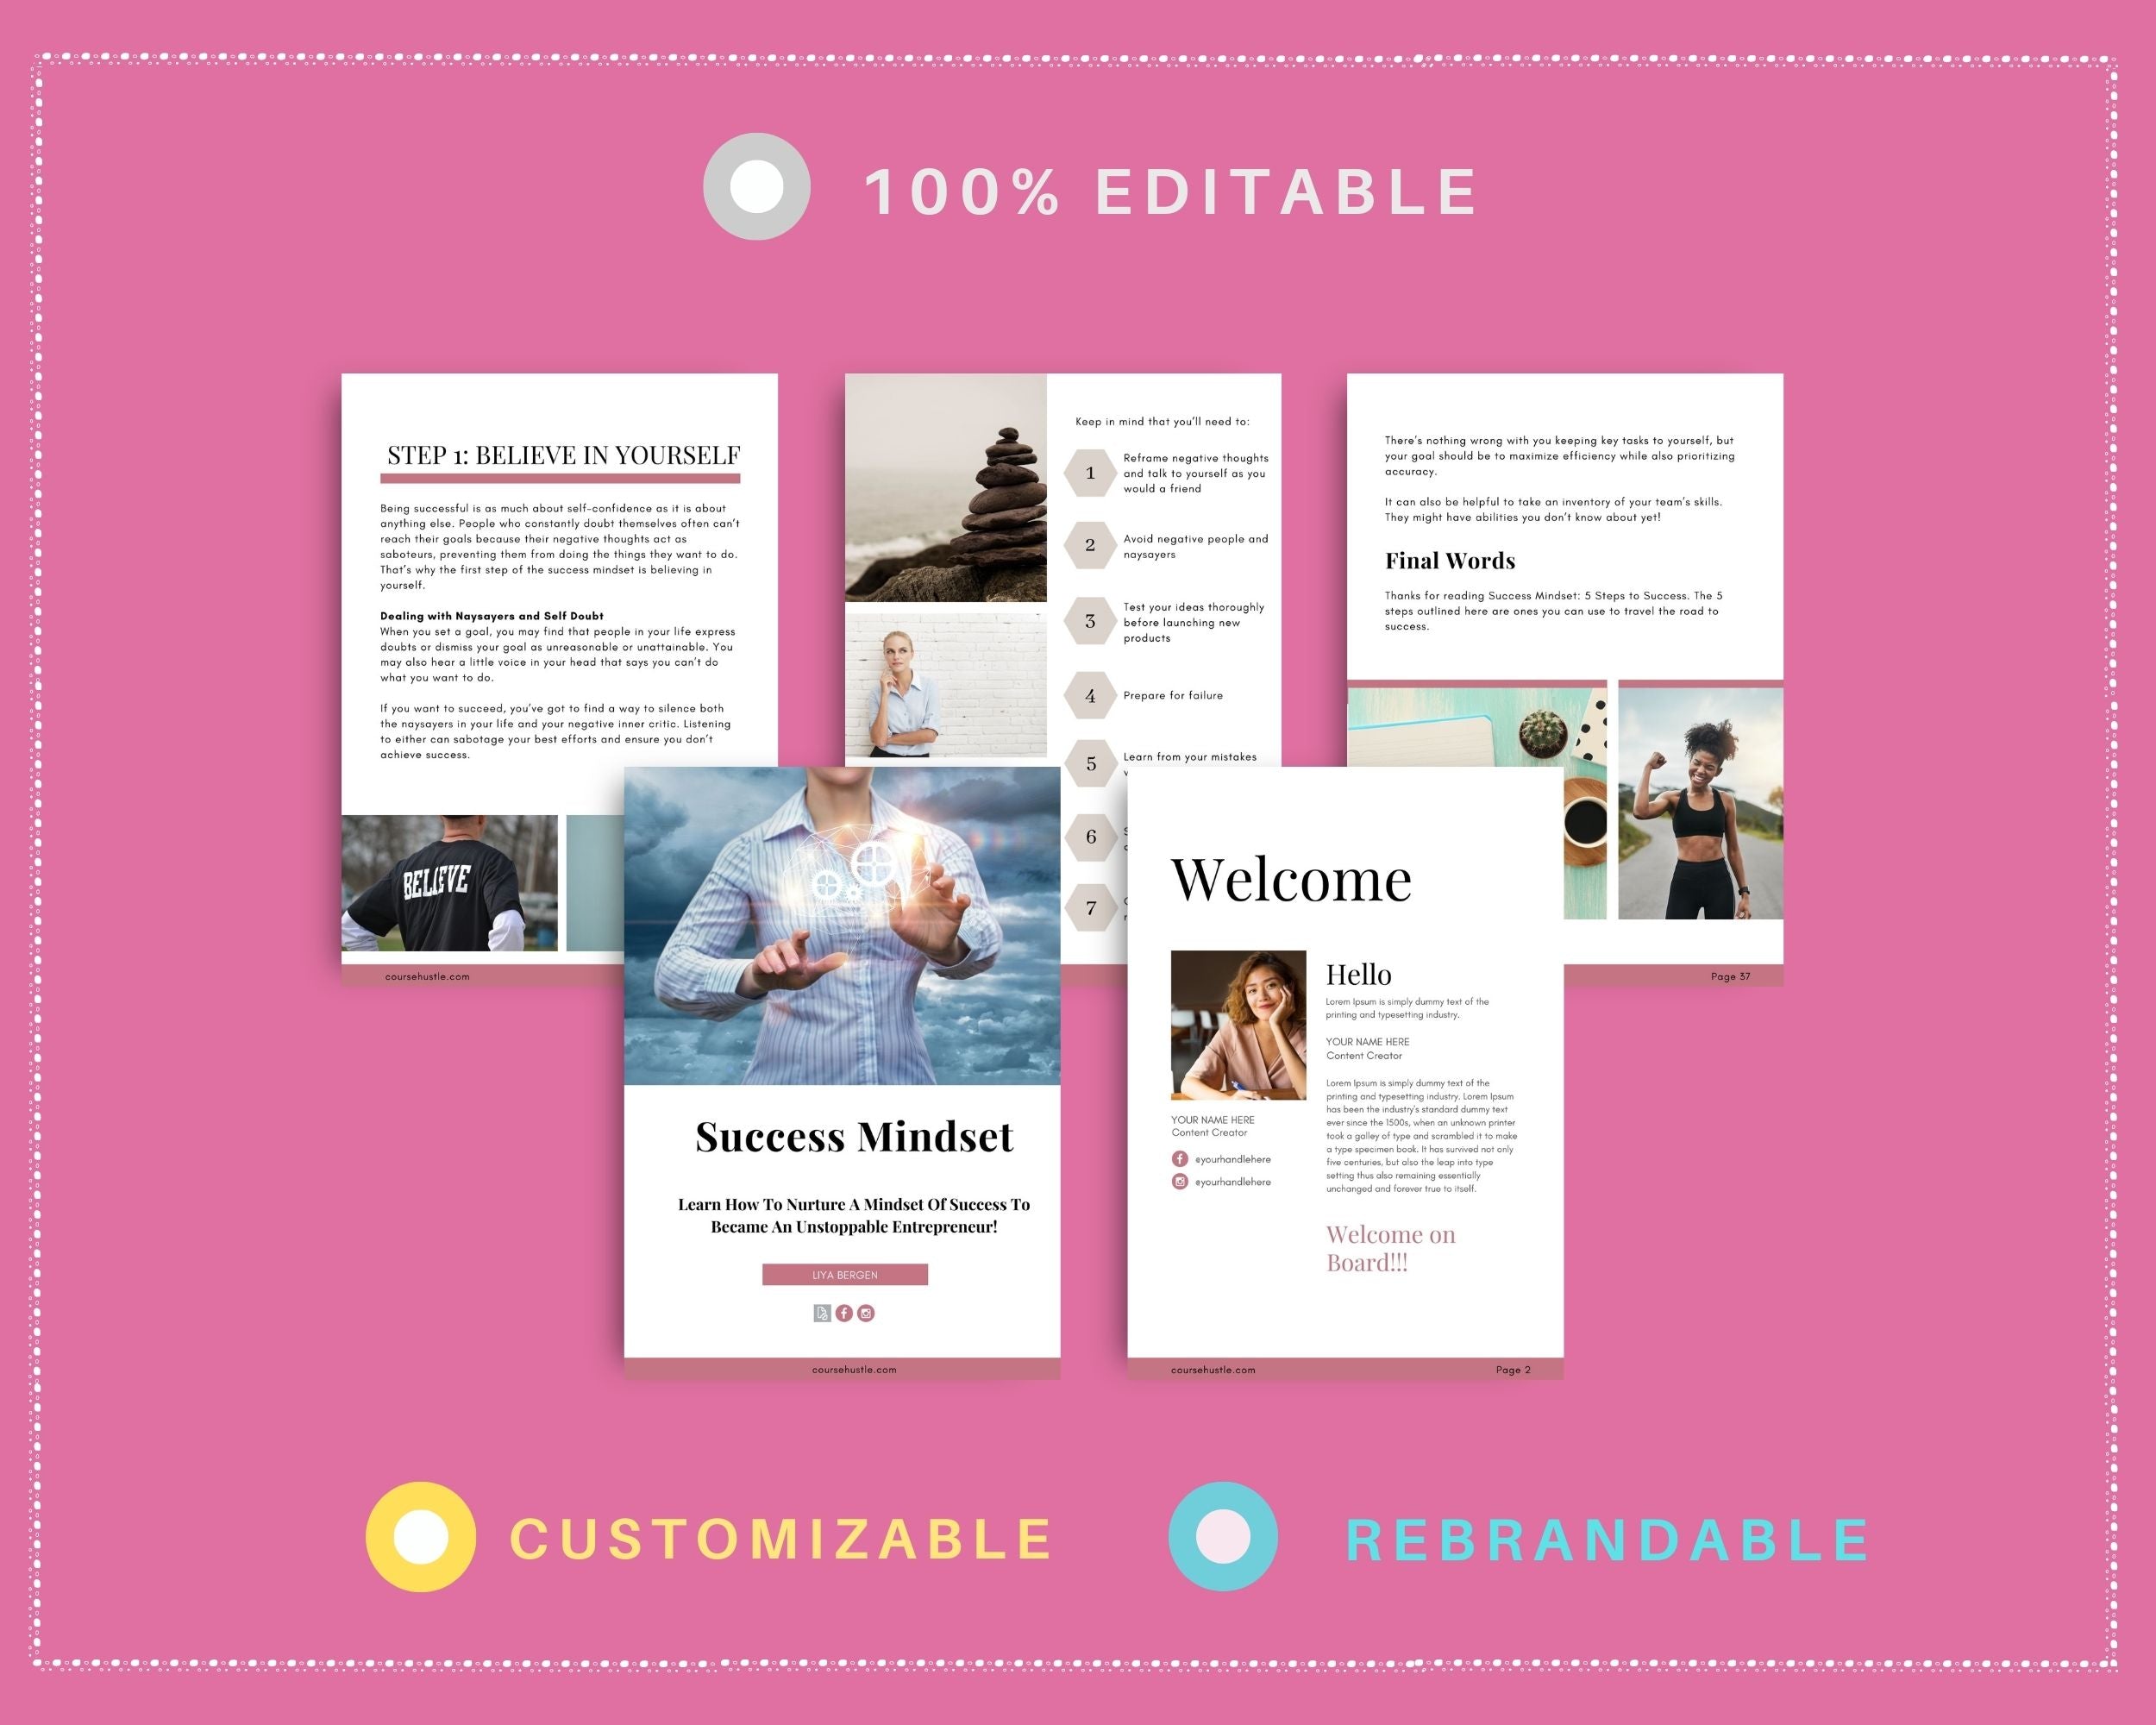 Done-for-You Success Mindset Playbook in Canva | Editable A4 Size Canva Template